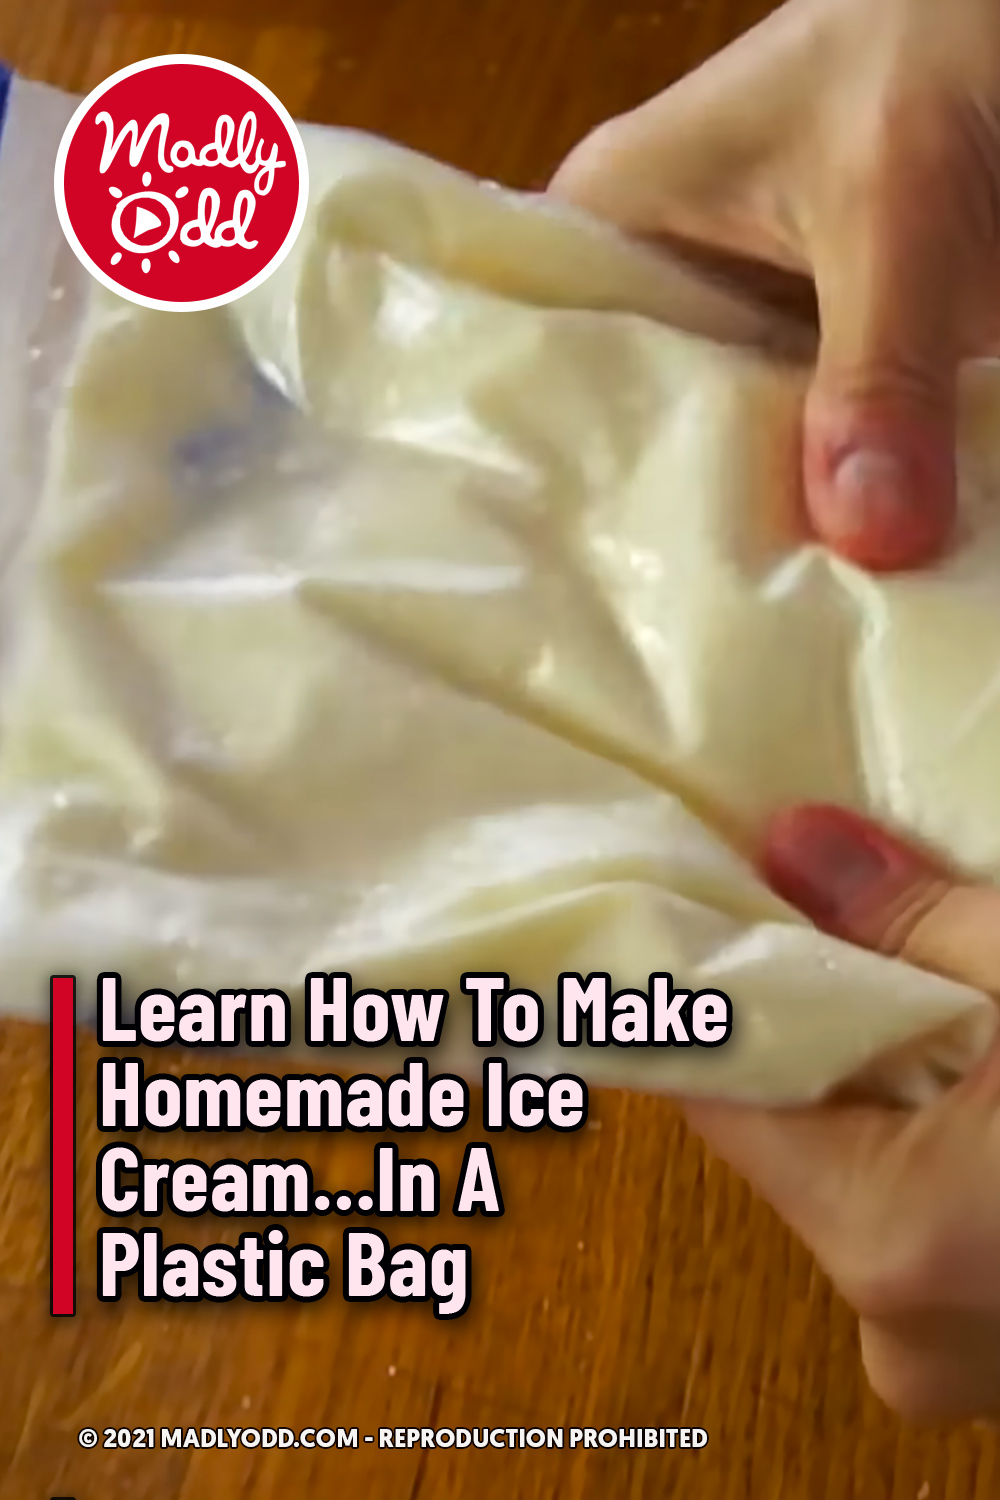 Learn How To Make Homemade Ice Cream...In A Plastic Bag